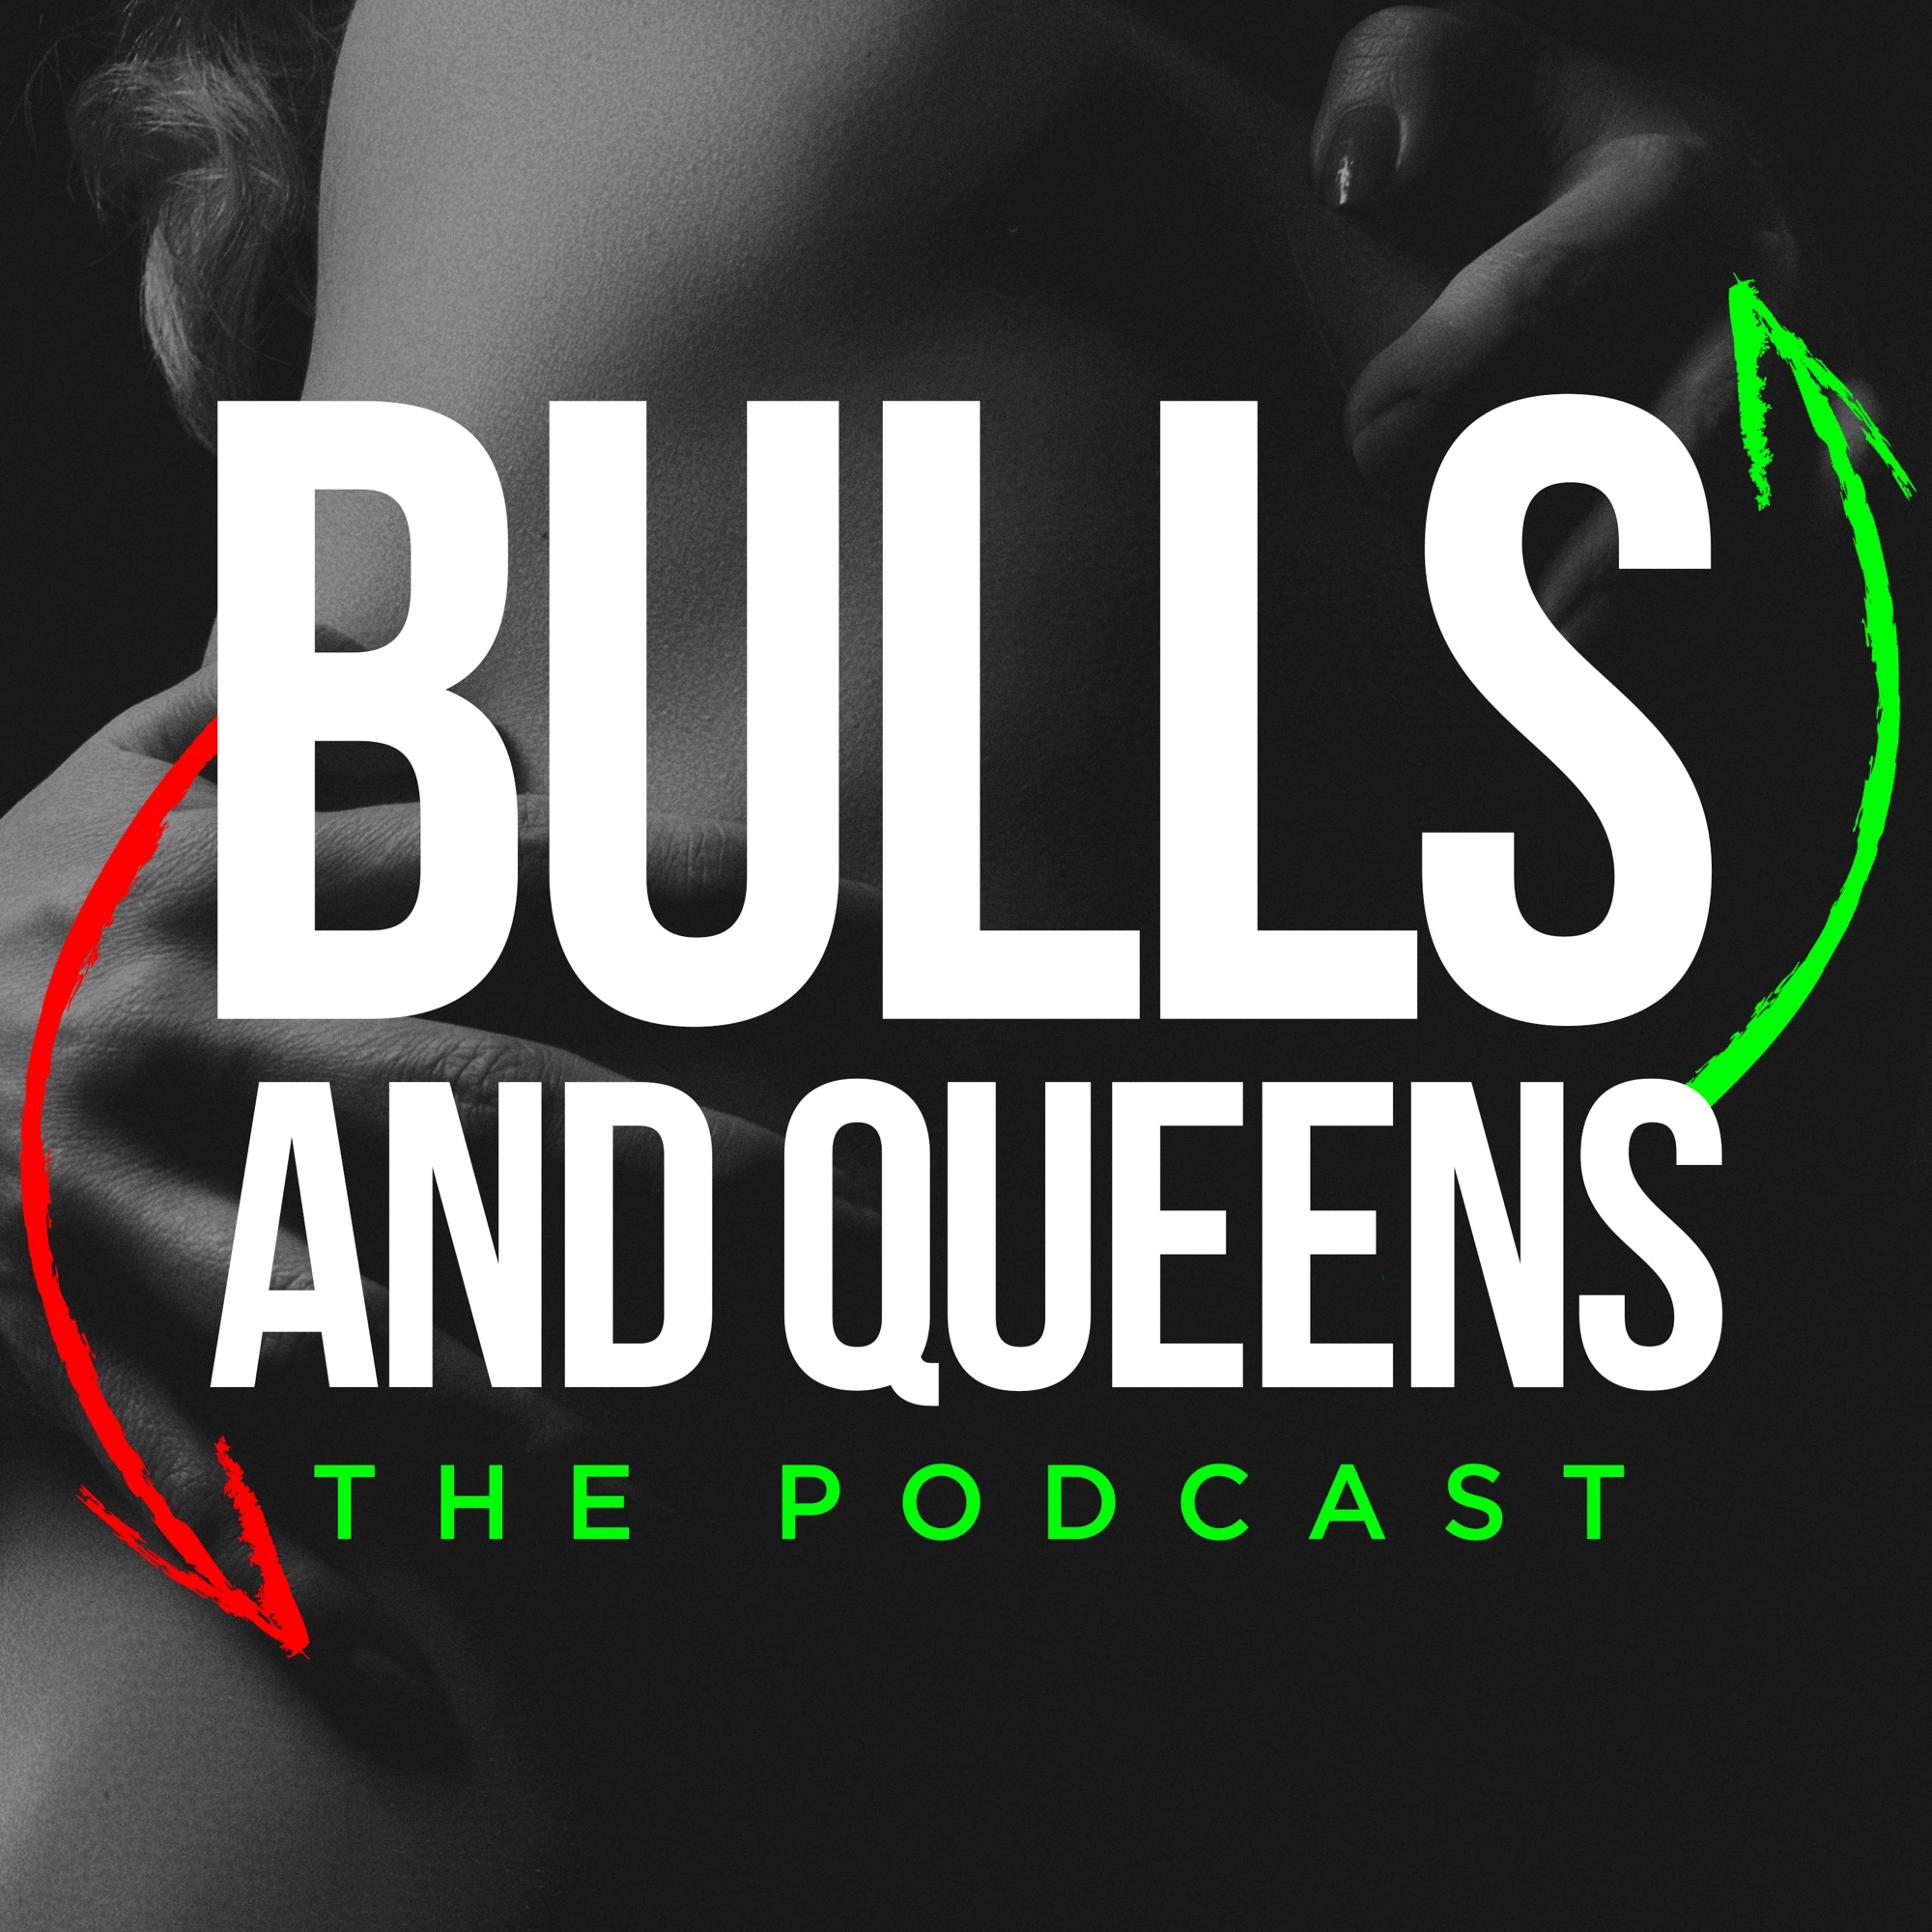 008 Cuckolding 101 And Cuck Week With Venus Cuckoldress Bulls And Queens Swinger Podcast For 